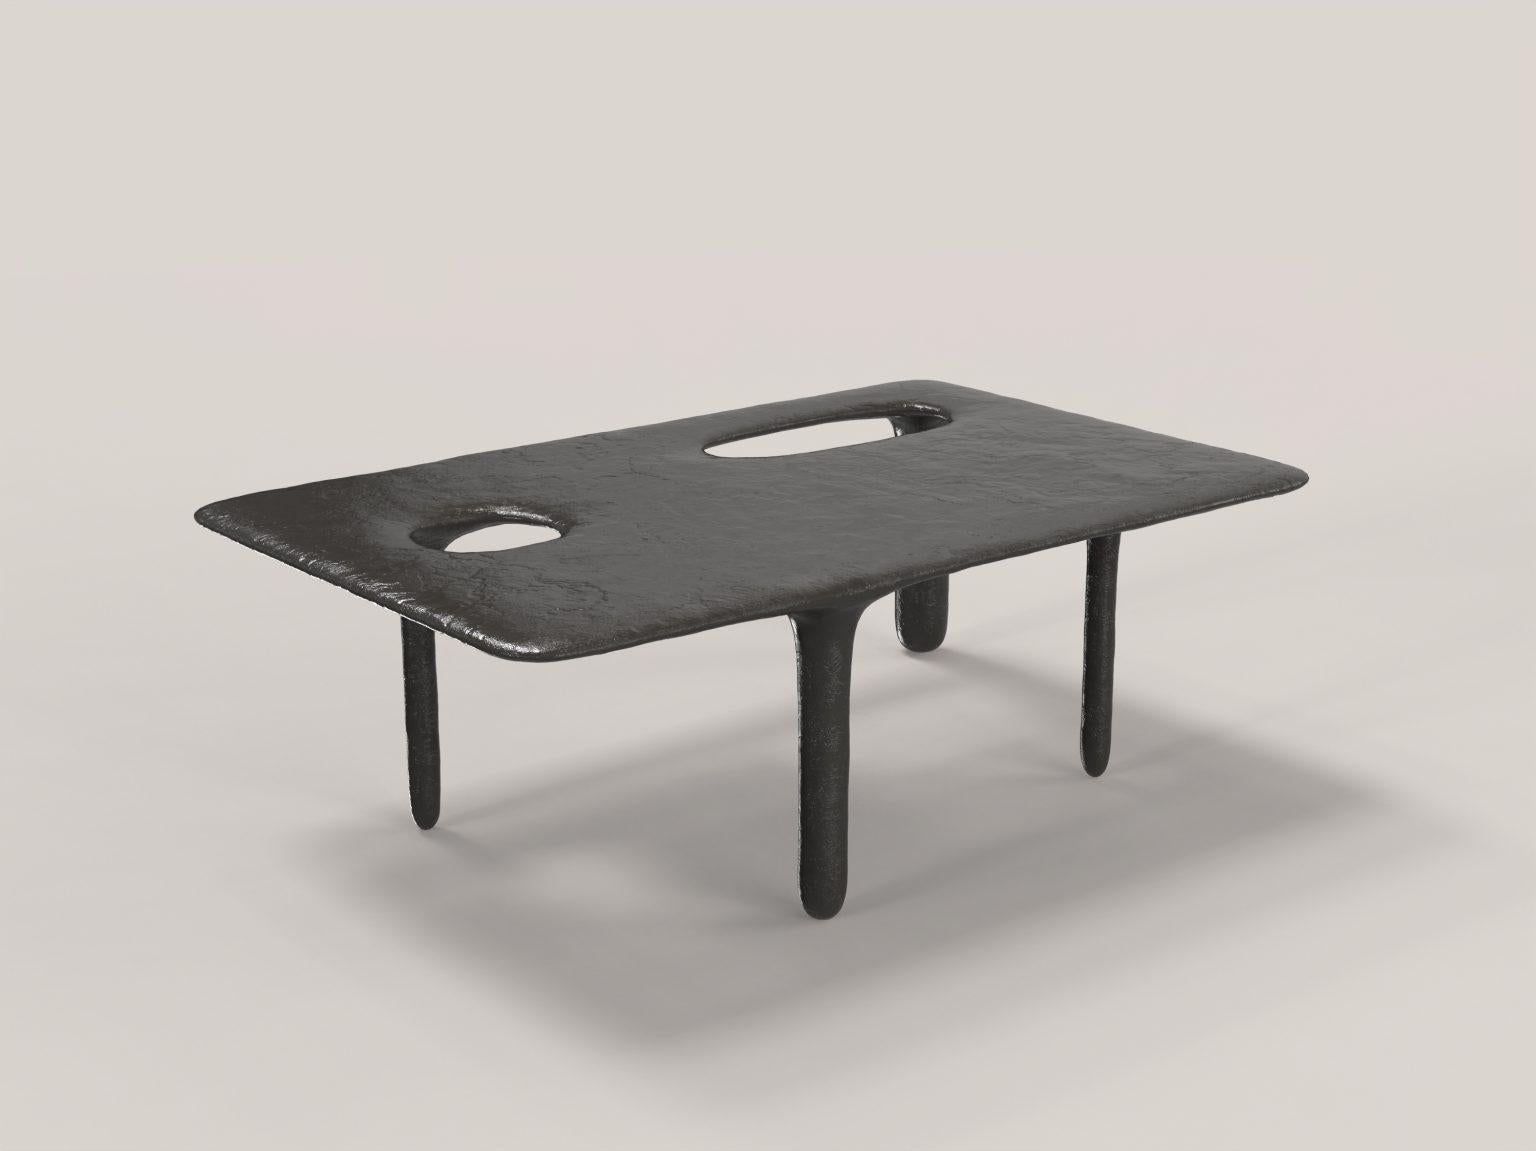 Cast Set of 2 Oasi V1 and V2 Low Tables by Edizione Limitata For Sale